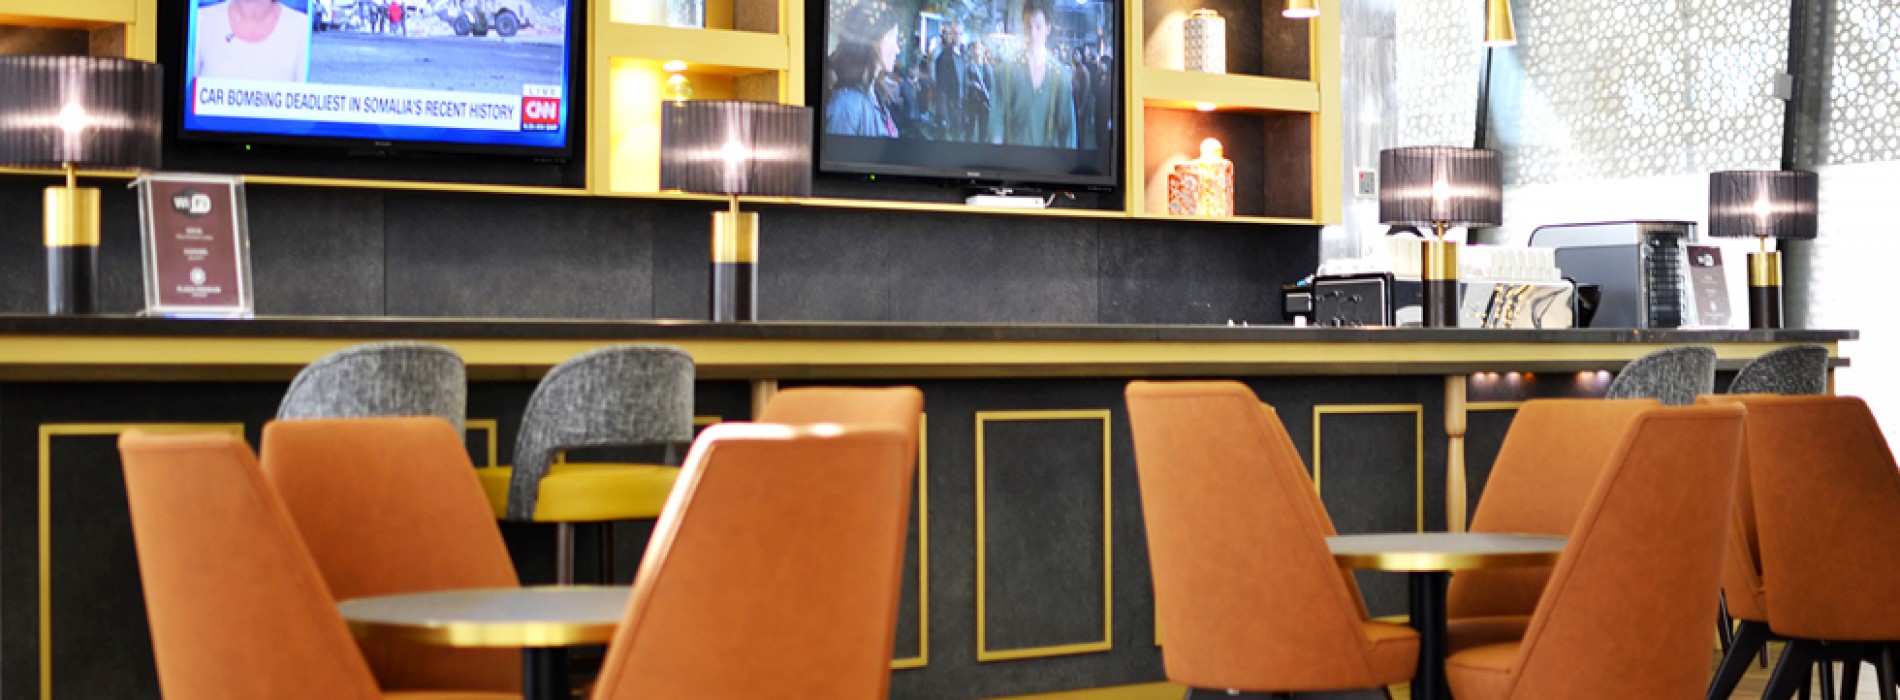 Plaza Premium Group opens new Lounge in Riyadh and wins Lounge Contract with Dammam Airport